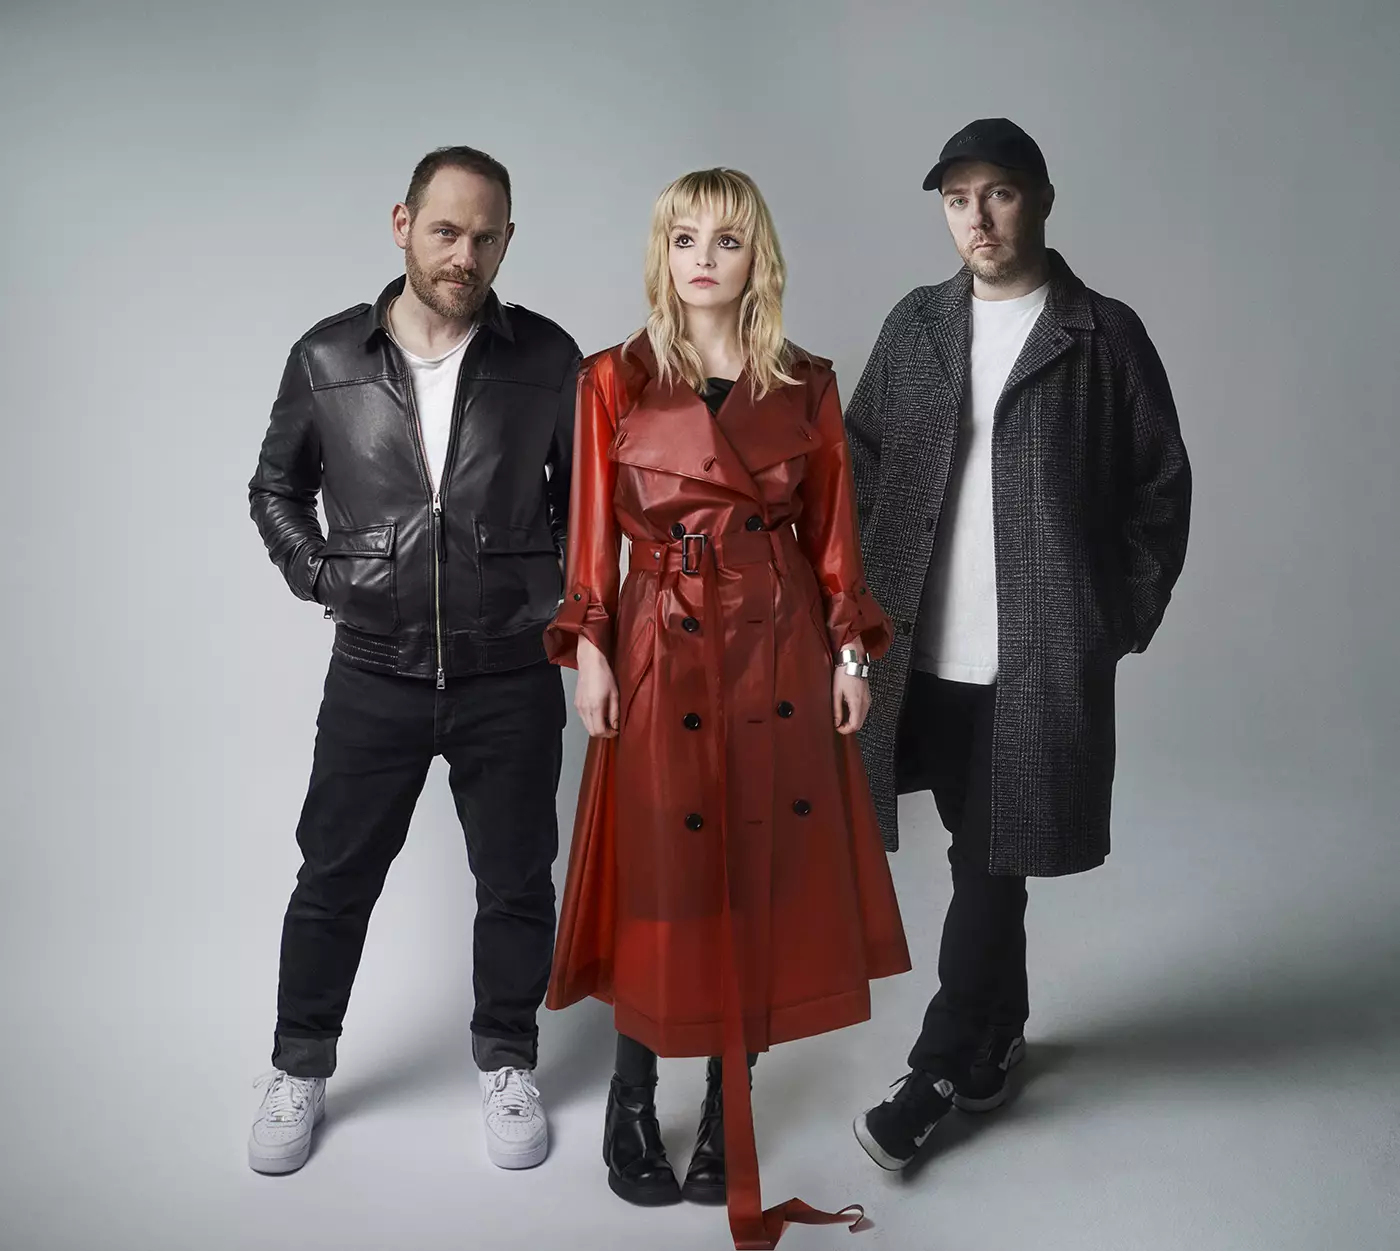 CHVRCHES (L-R: Iain Cook, Lauren Mayberry, Martin Doherty) /